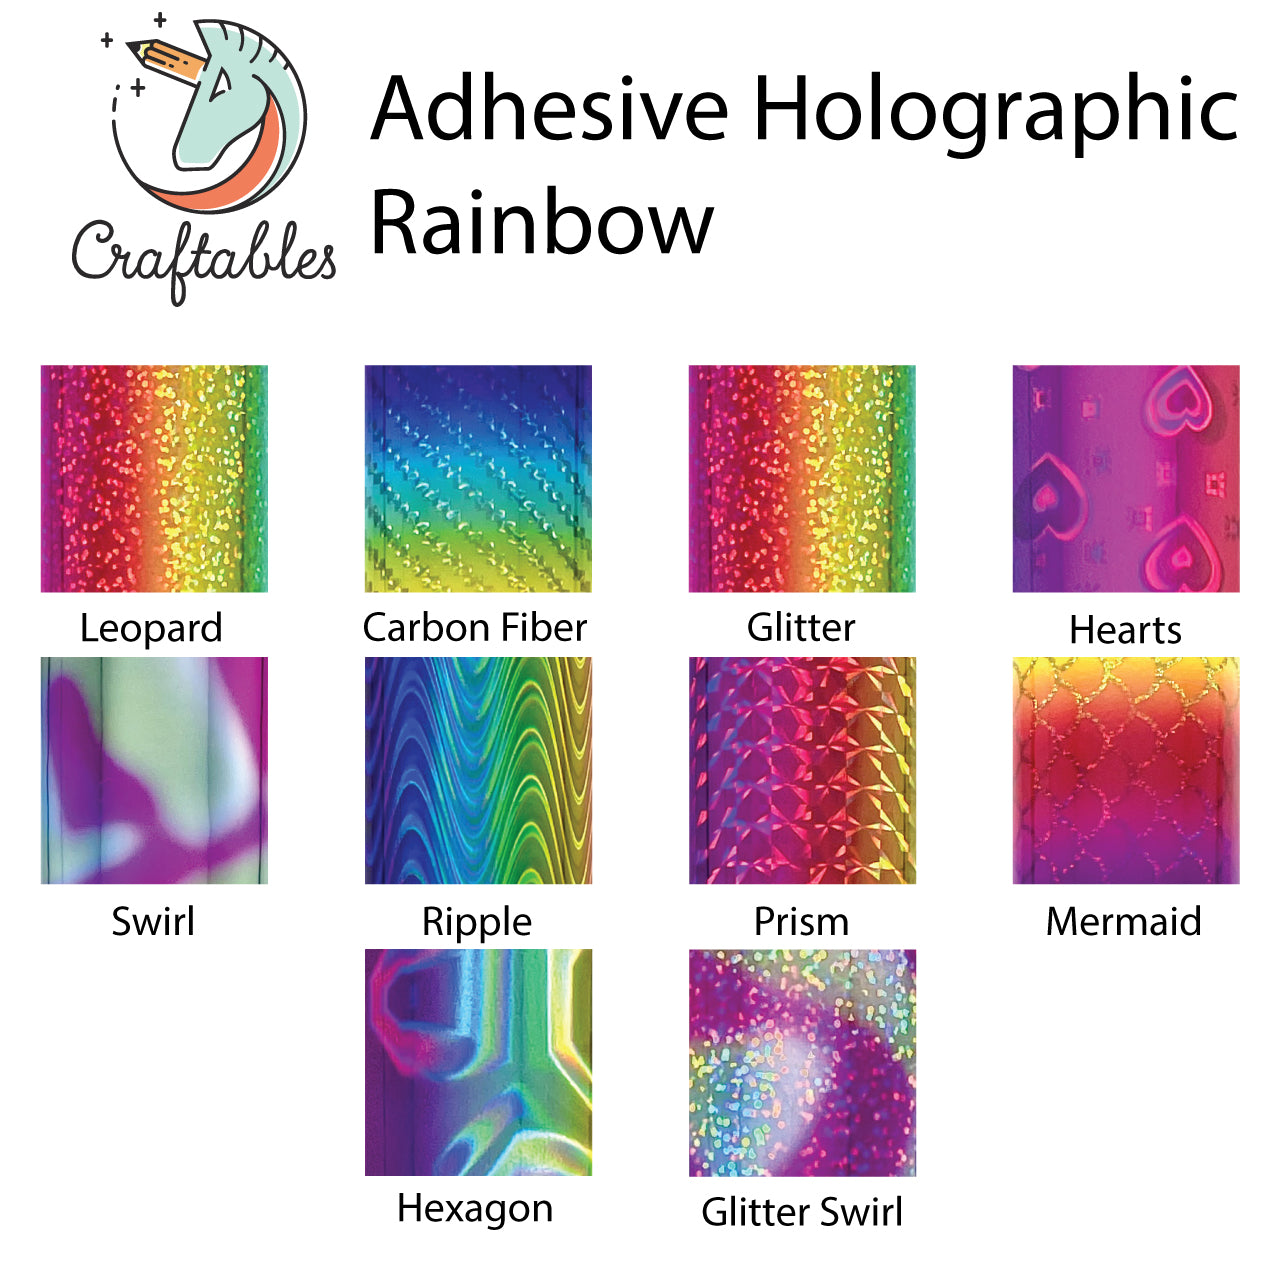 Mermaid Rainbow Holographic Adhesive Vinyl Sheets By Craftables